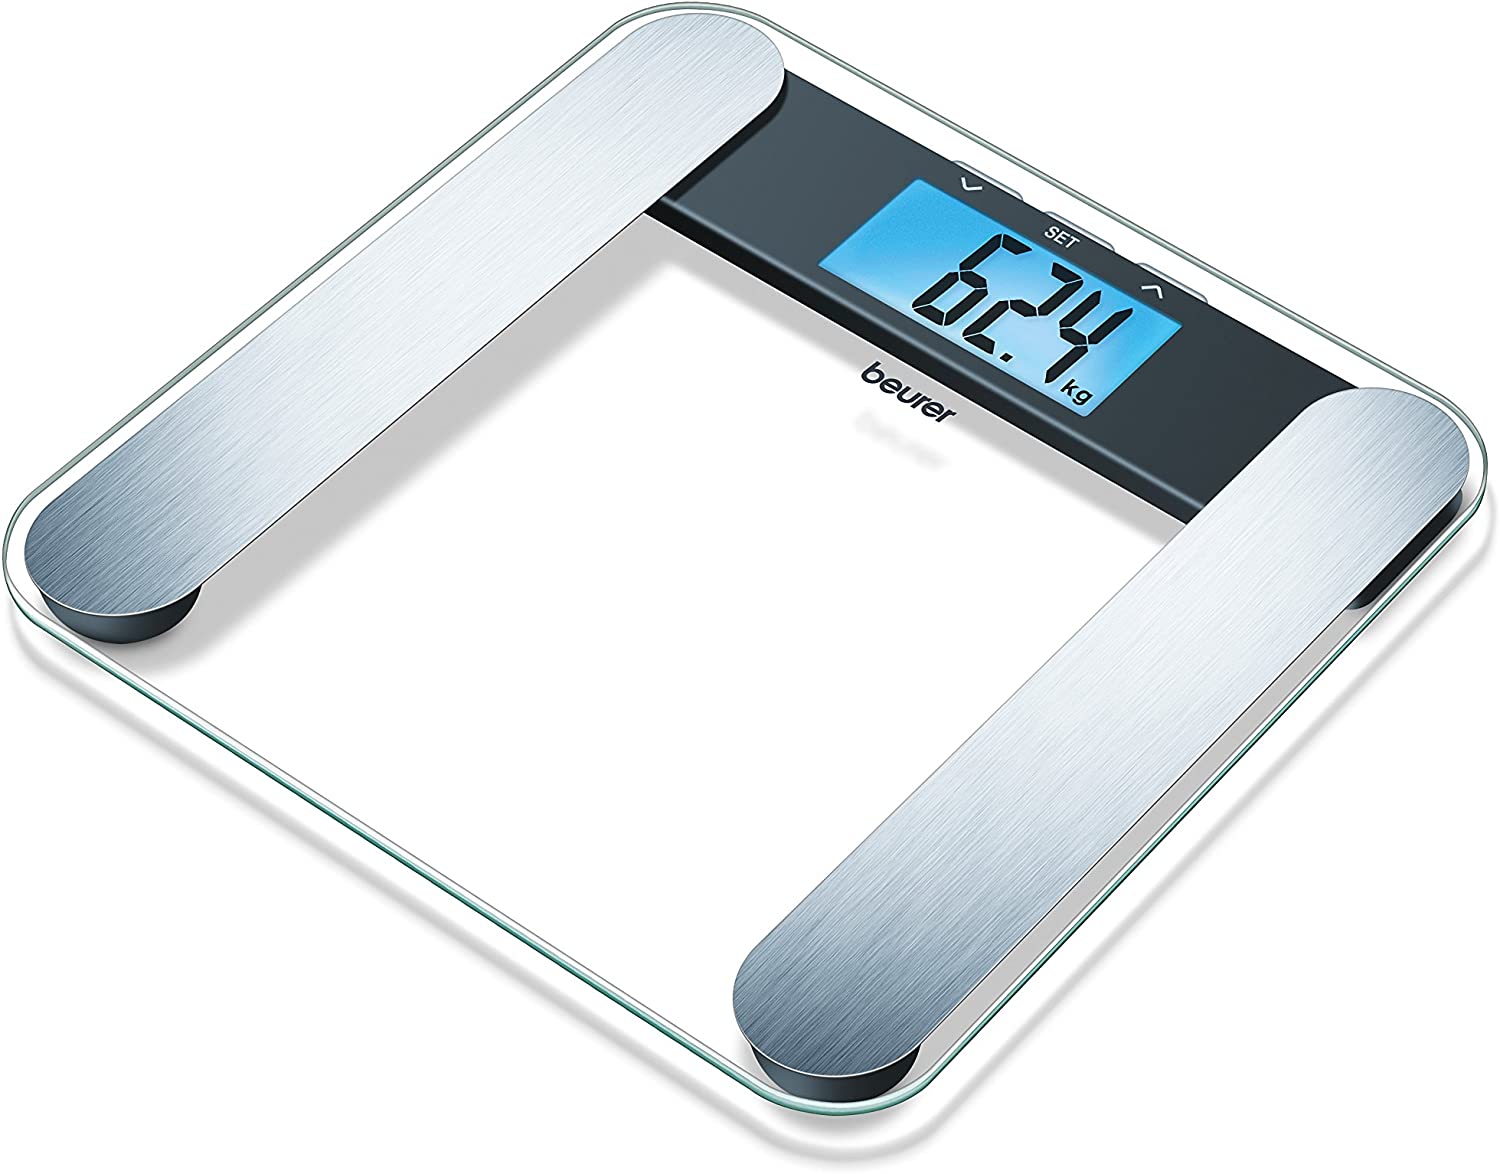 Beurer BF 220 Glass Diagnostic Scales with Extra Large LCD Display Load Capacity up to 180 kg